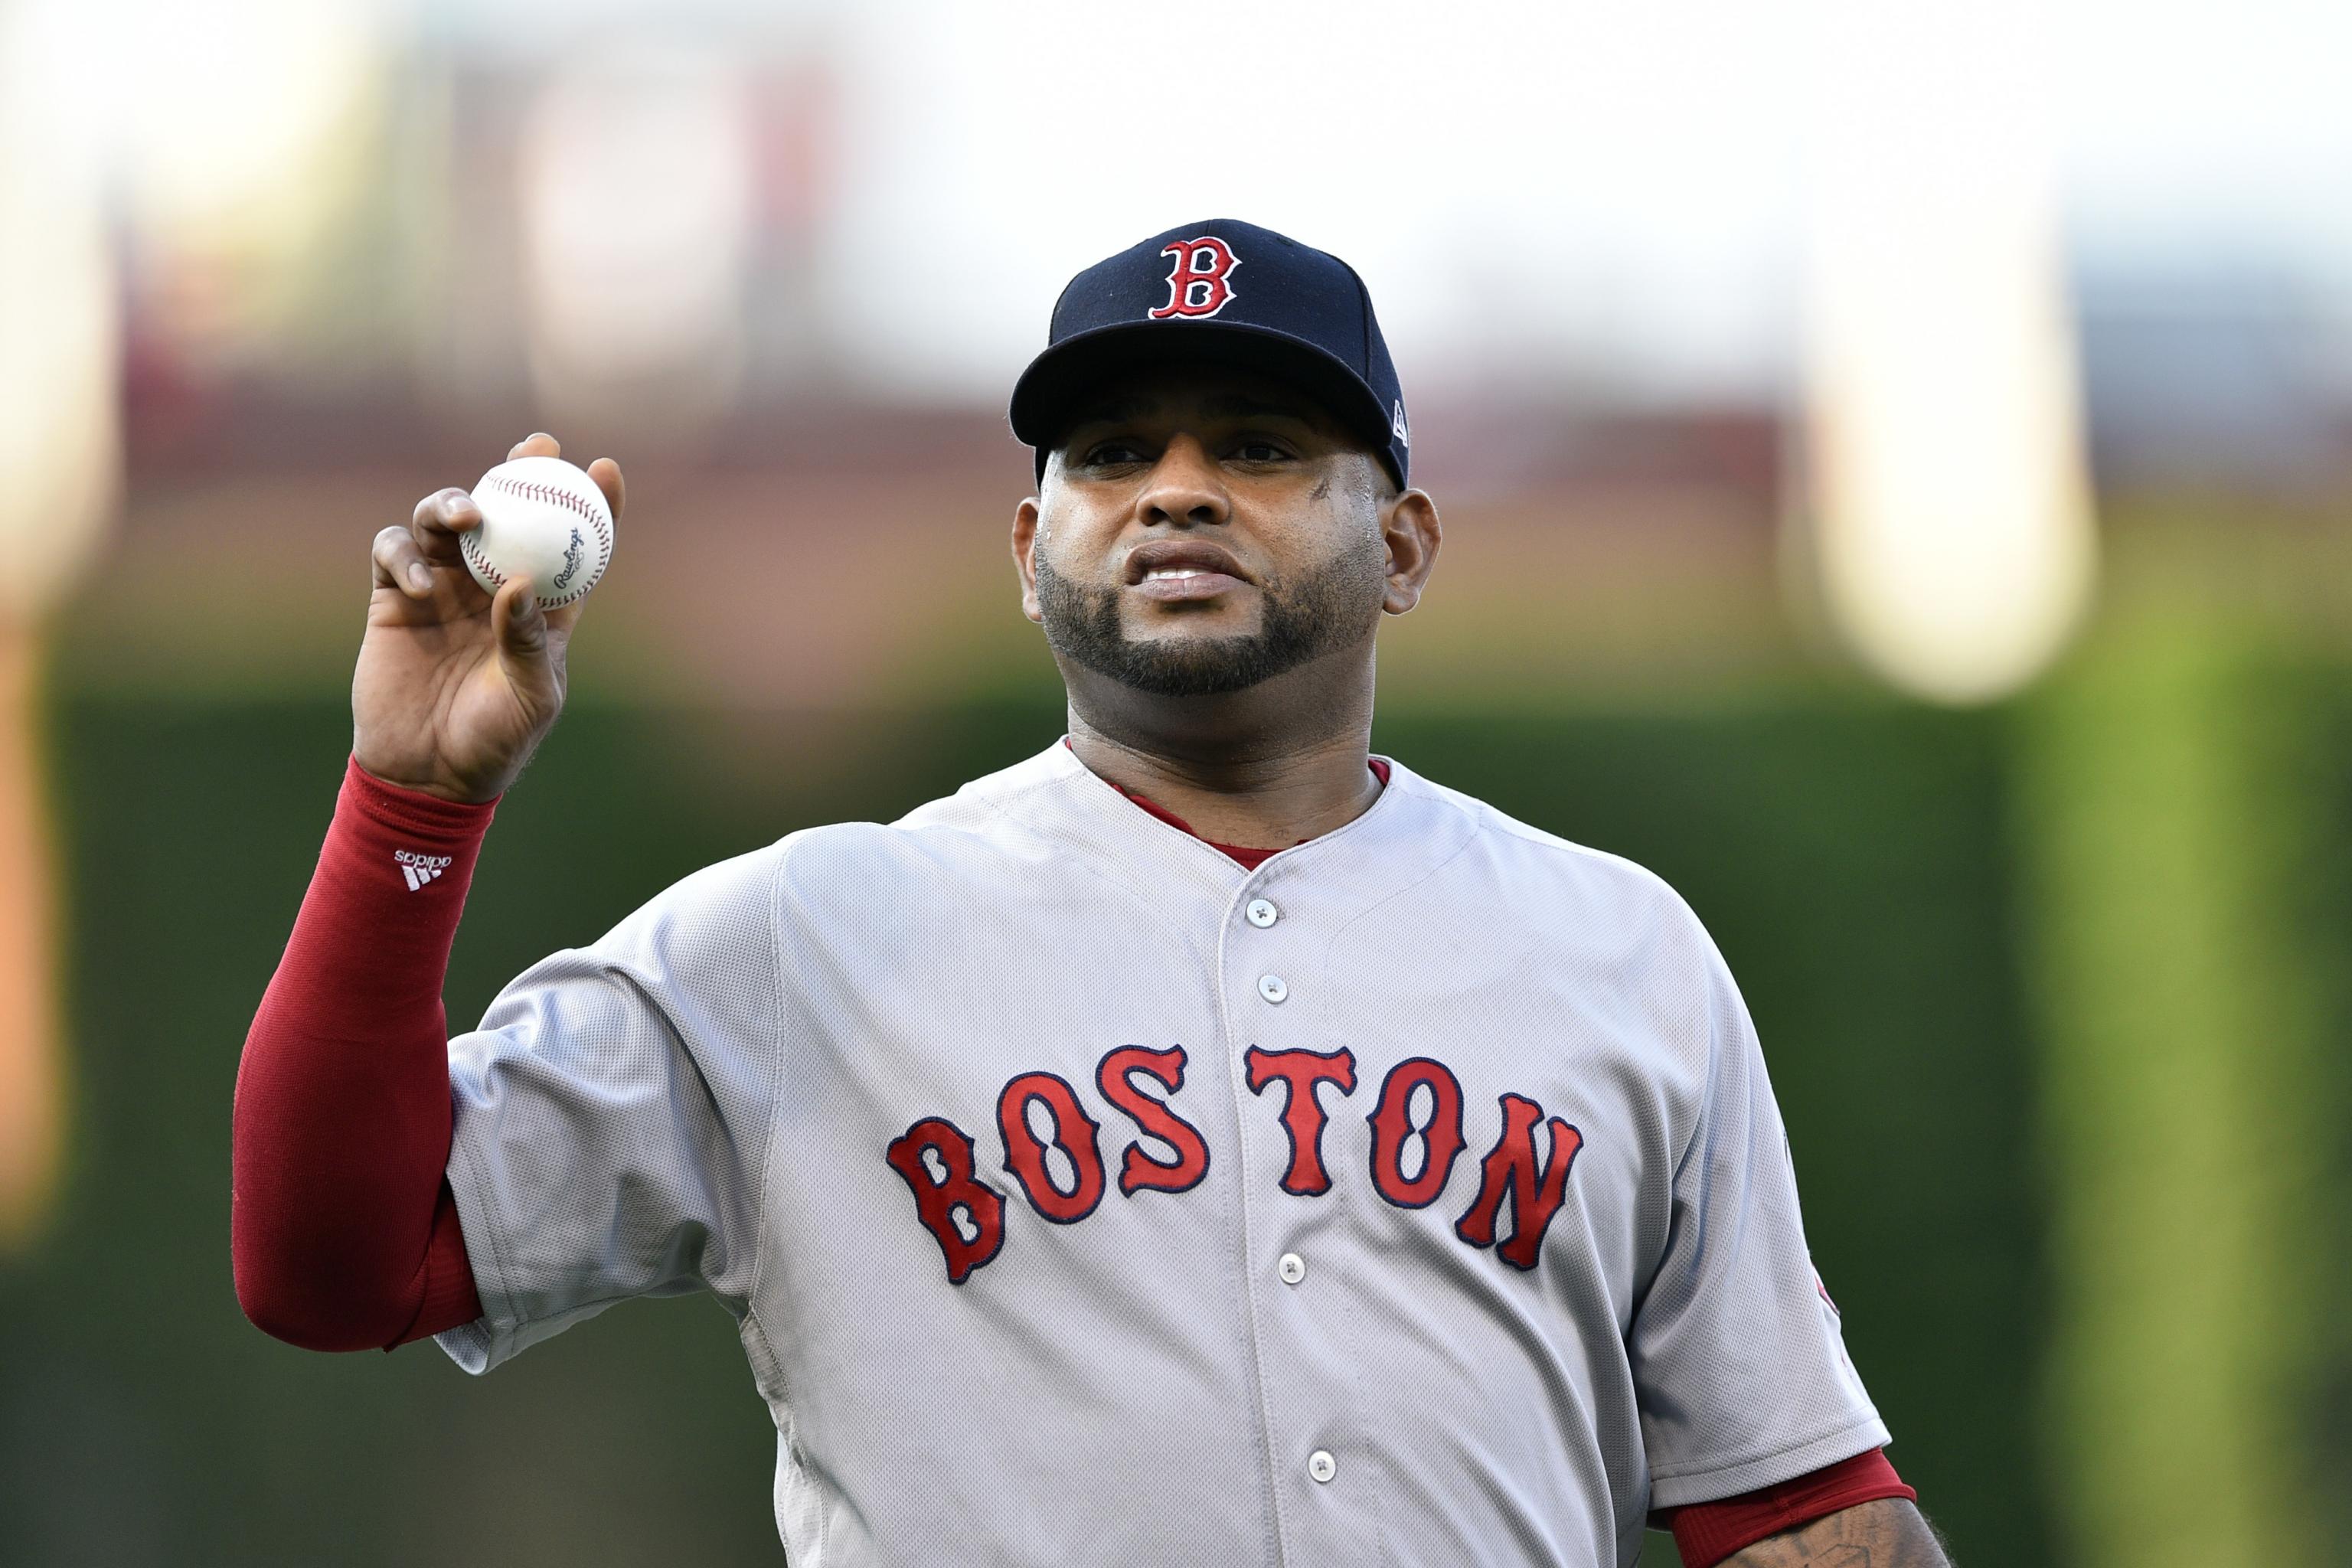 Baseball star Pablo Sandoval caught checking out model's online